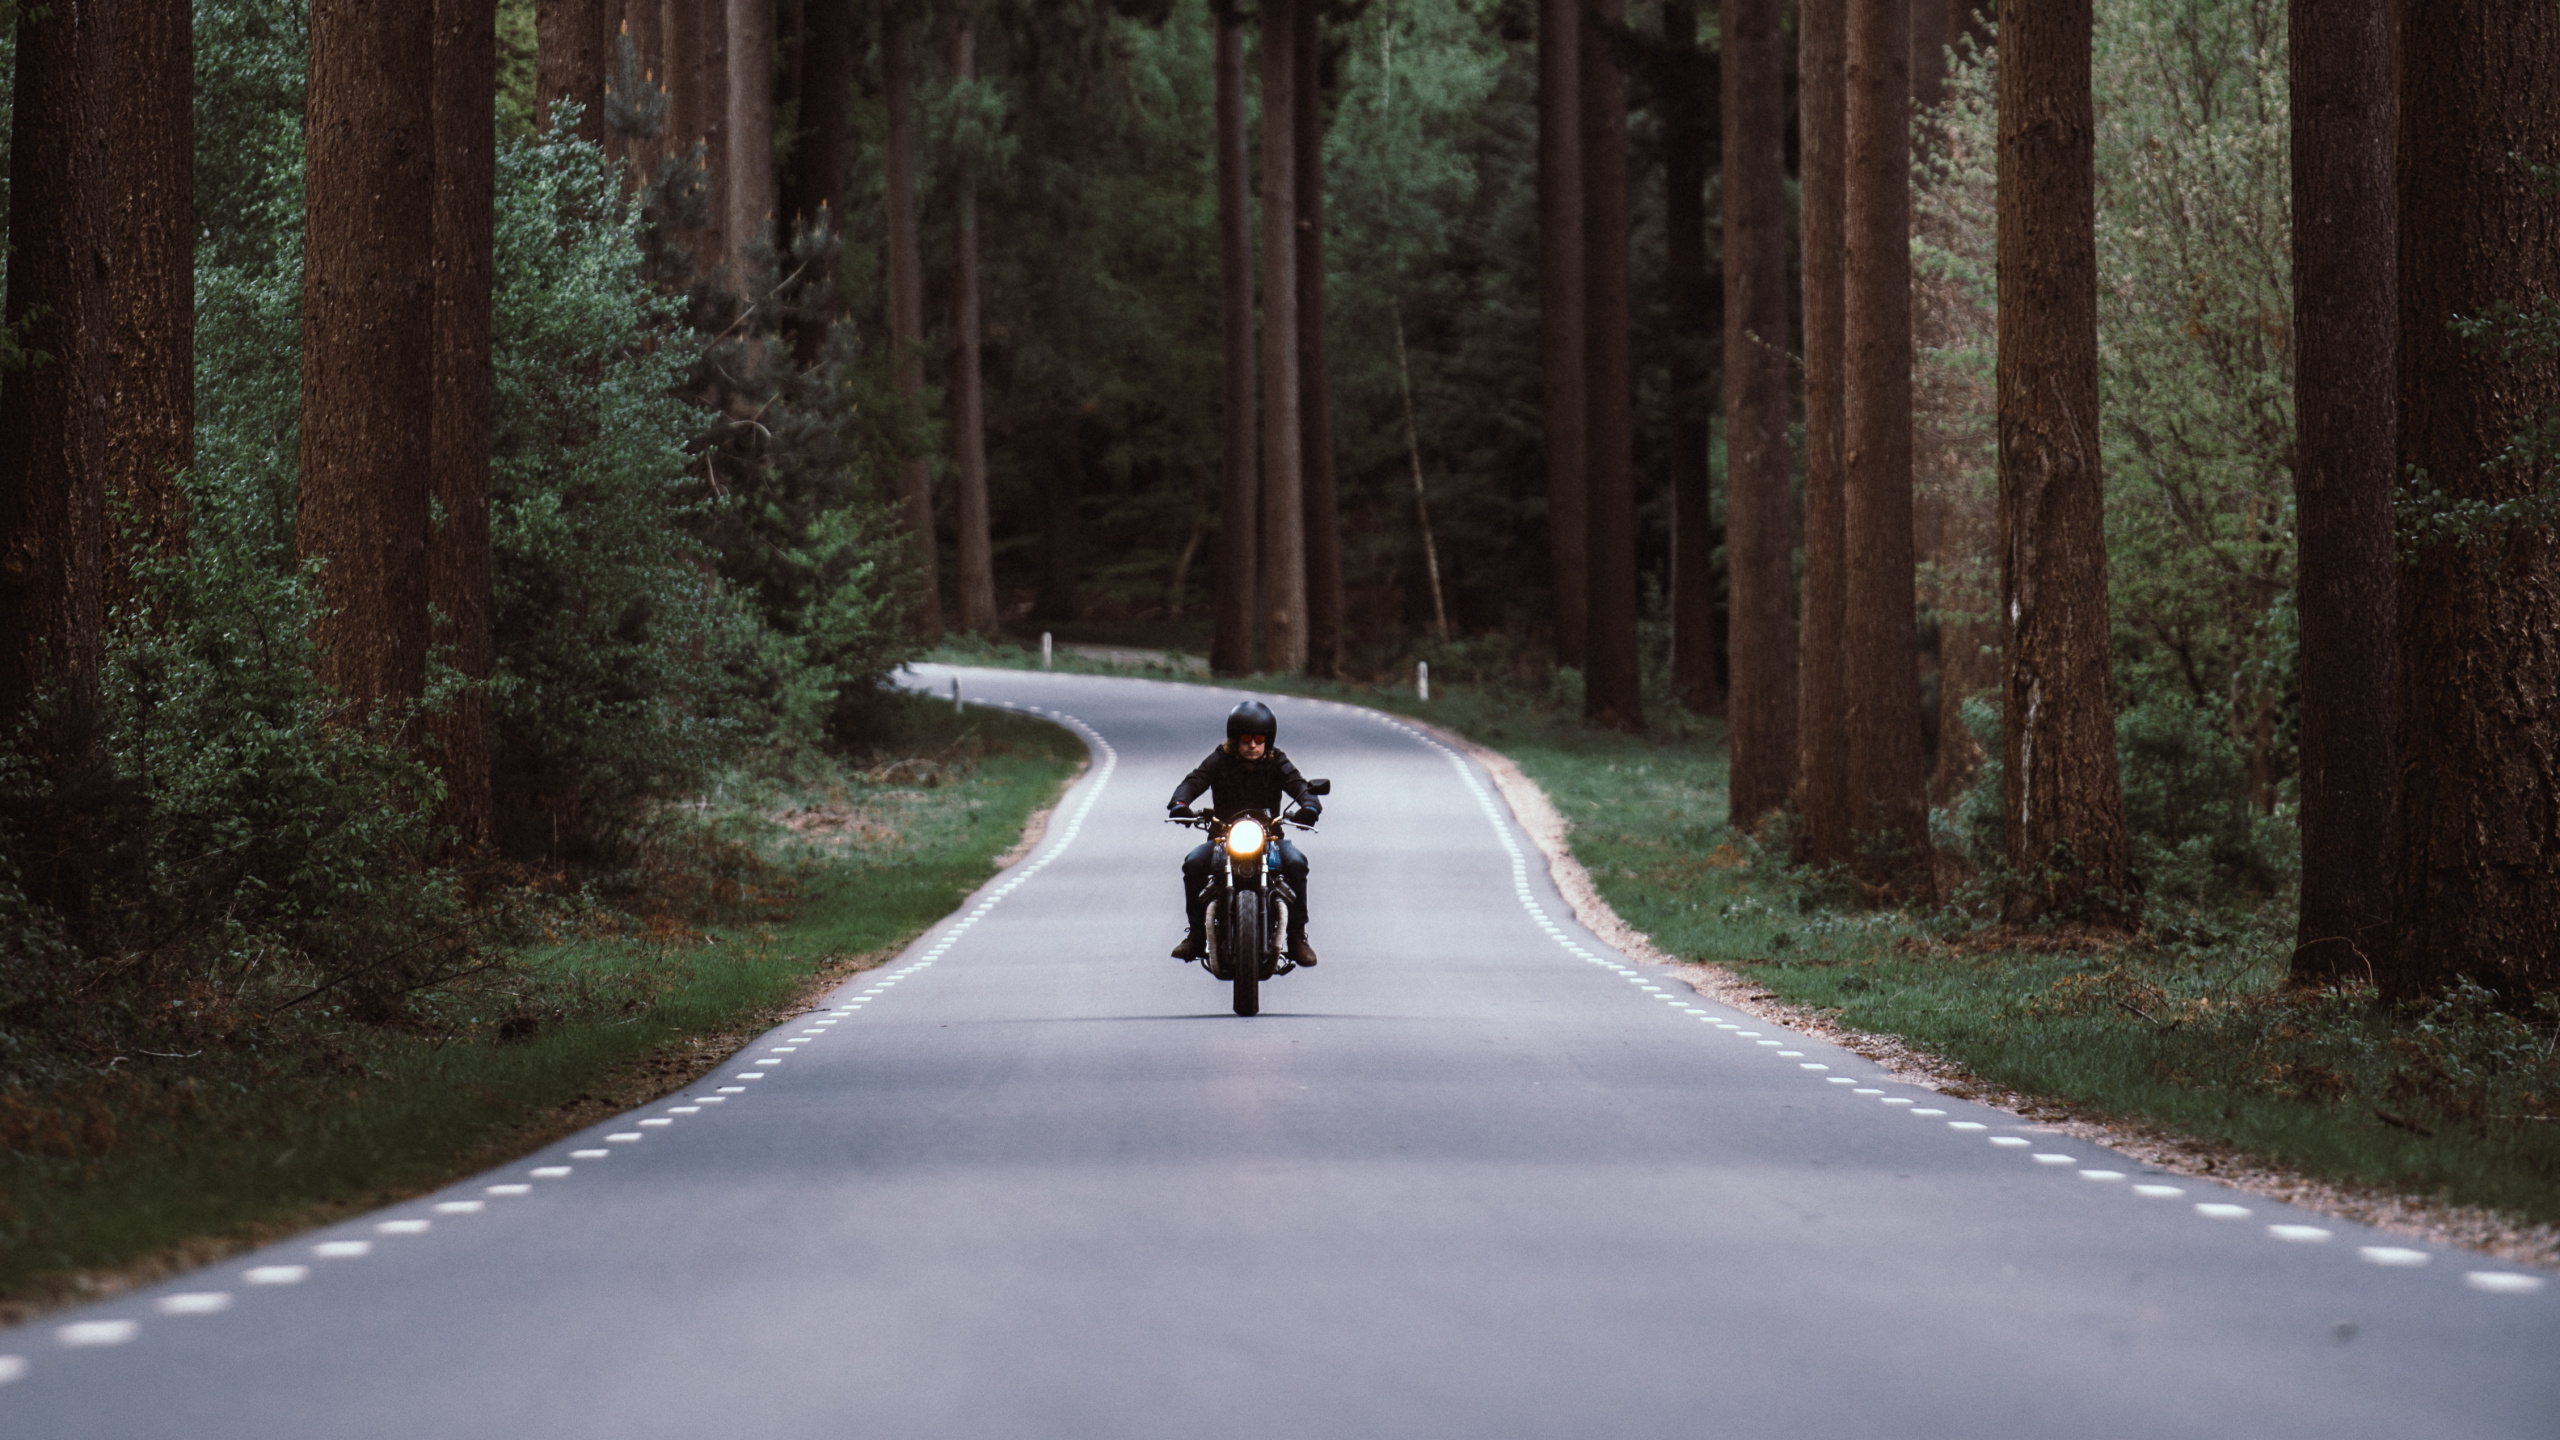 Person Riding Motorcycle on Road Between Trees During Daytime. Wallpaper in 2560x1440 Resolution